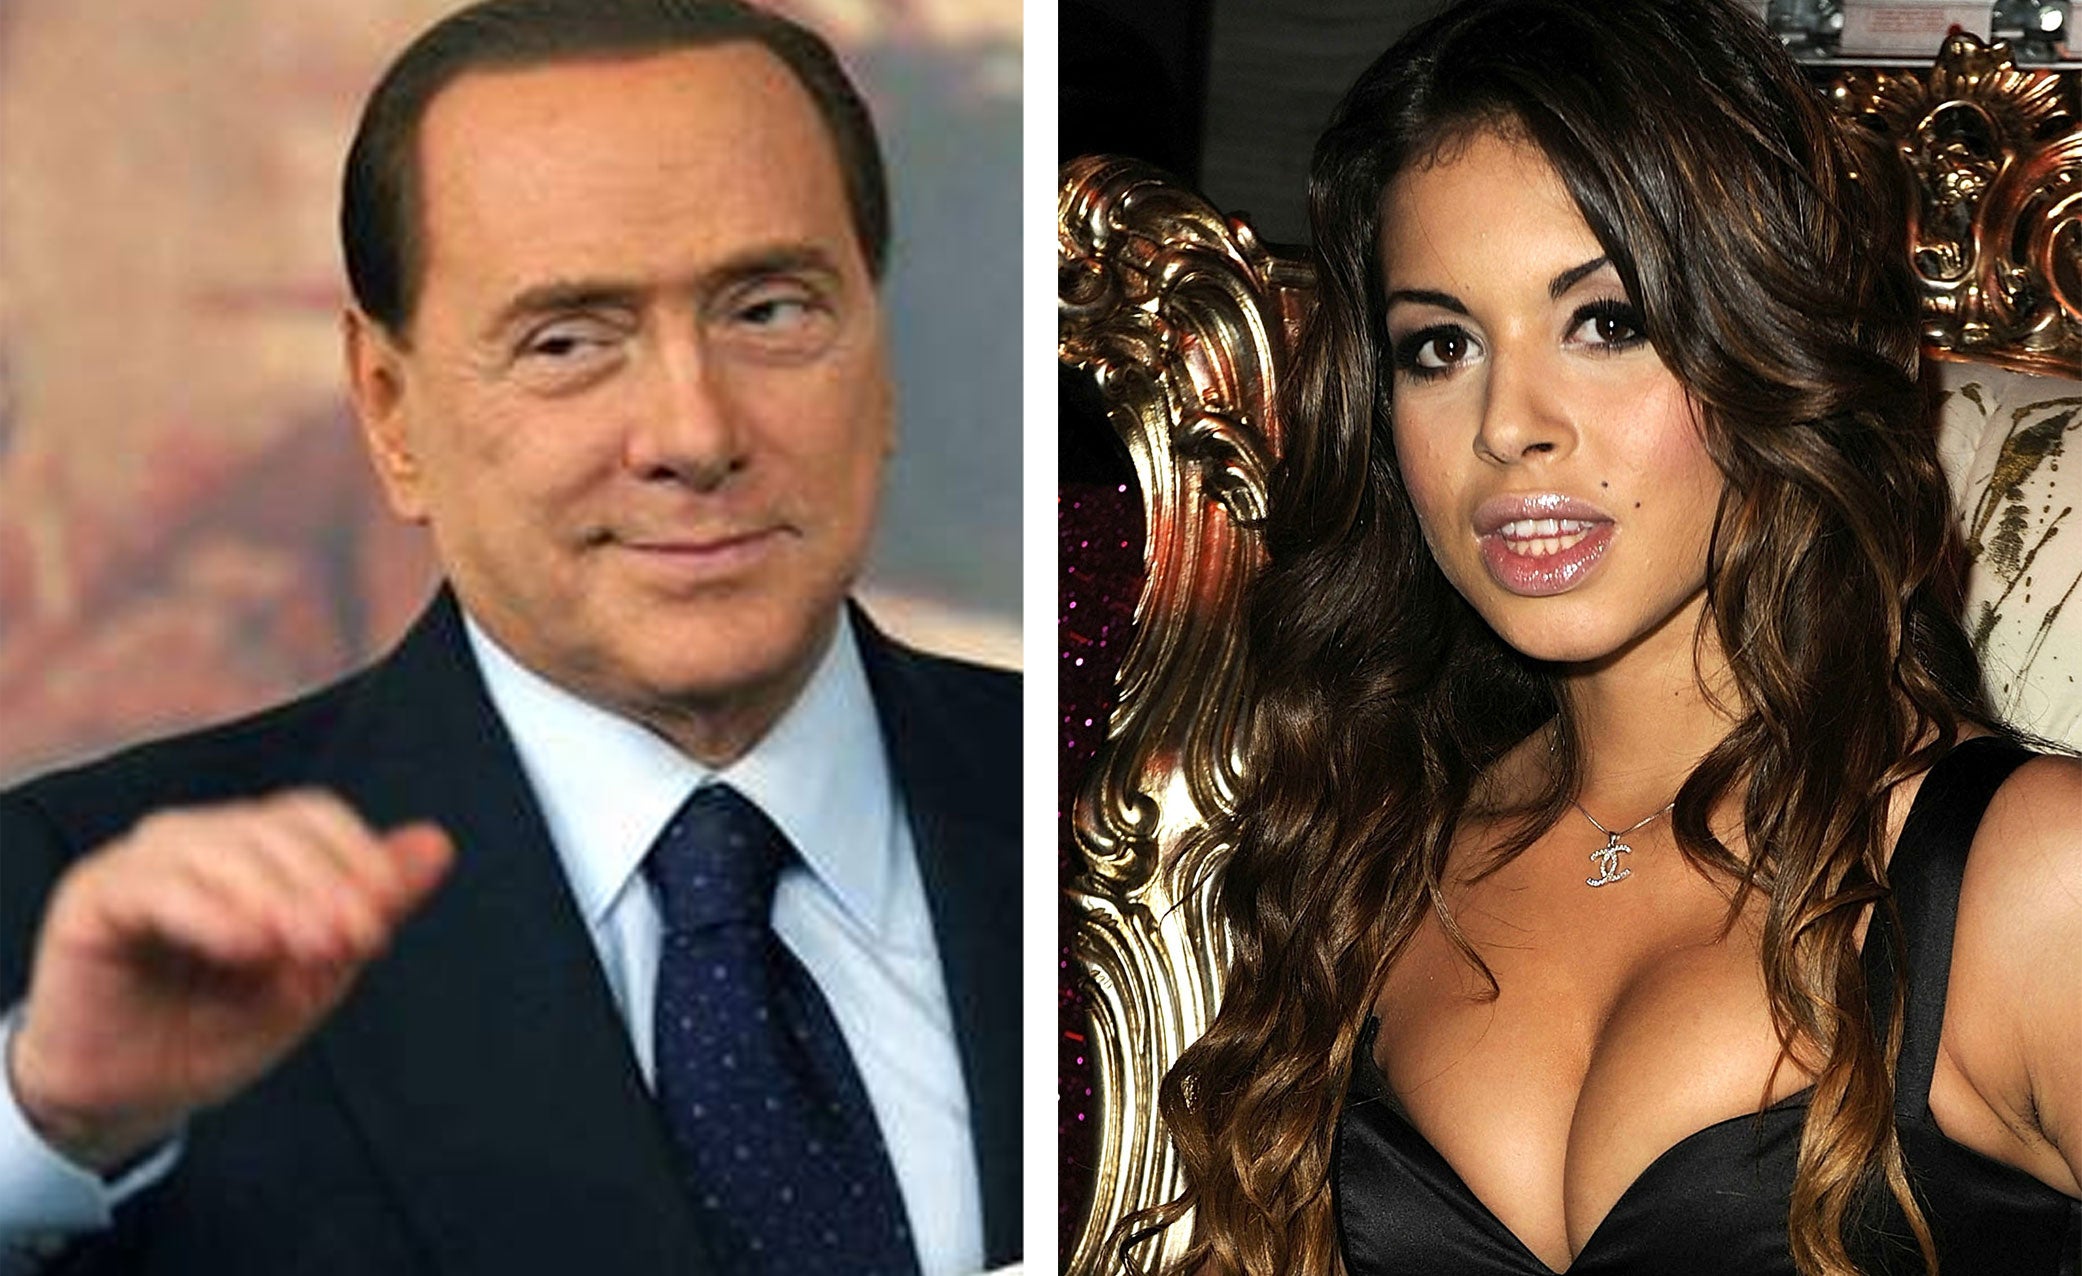 Just what have we learned from the Berlusconi Bunga  Bunga  